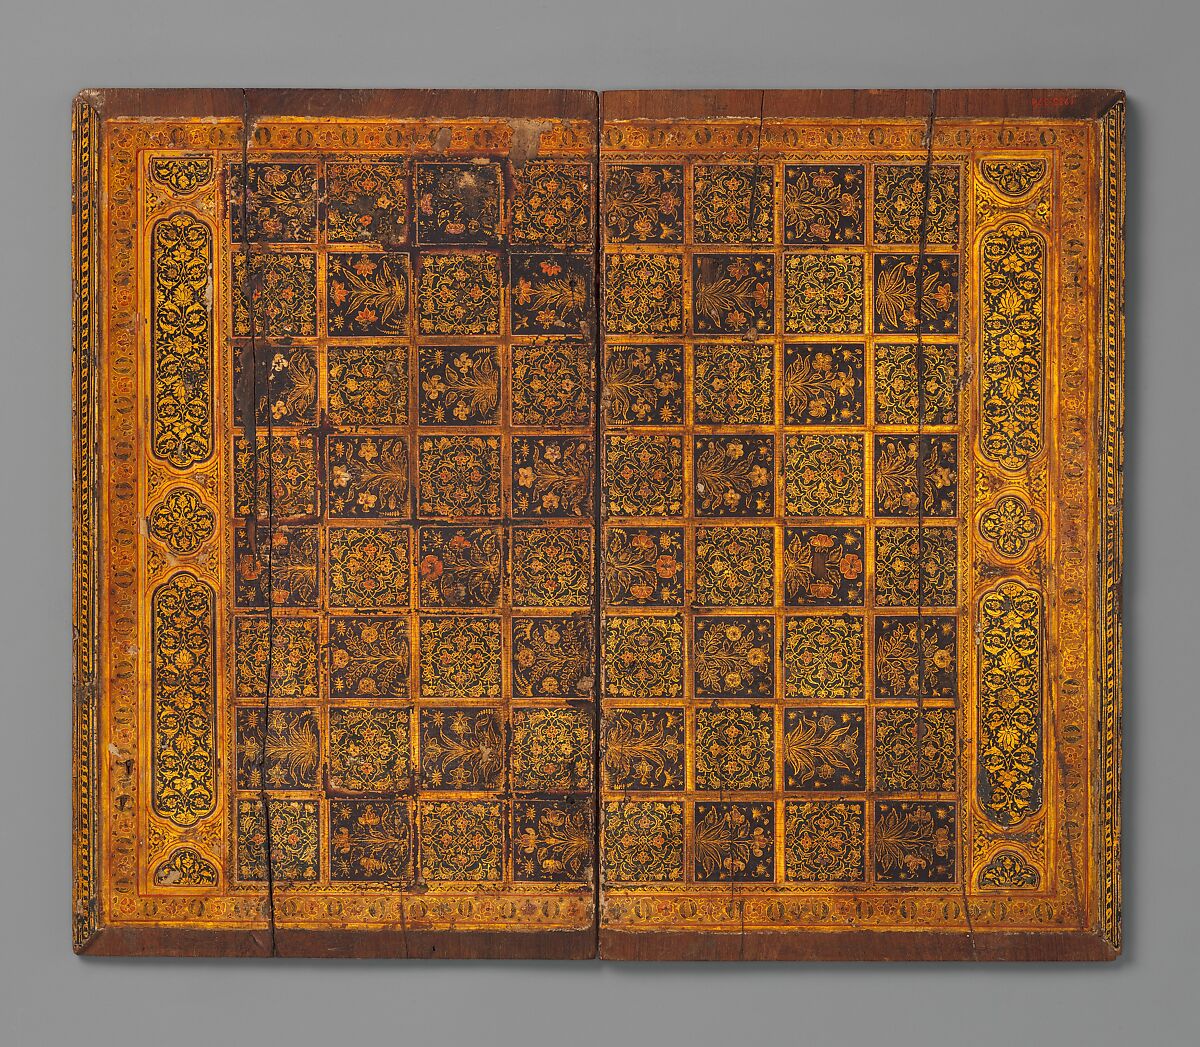 Painted and Inlaid Game Board, Wood; painted, varnished and gilded; with metal hinges 